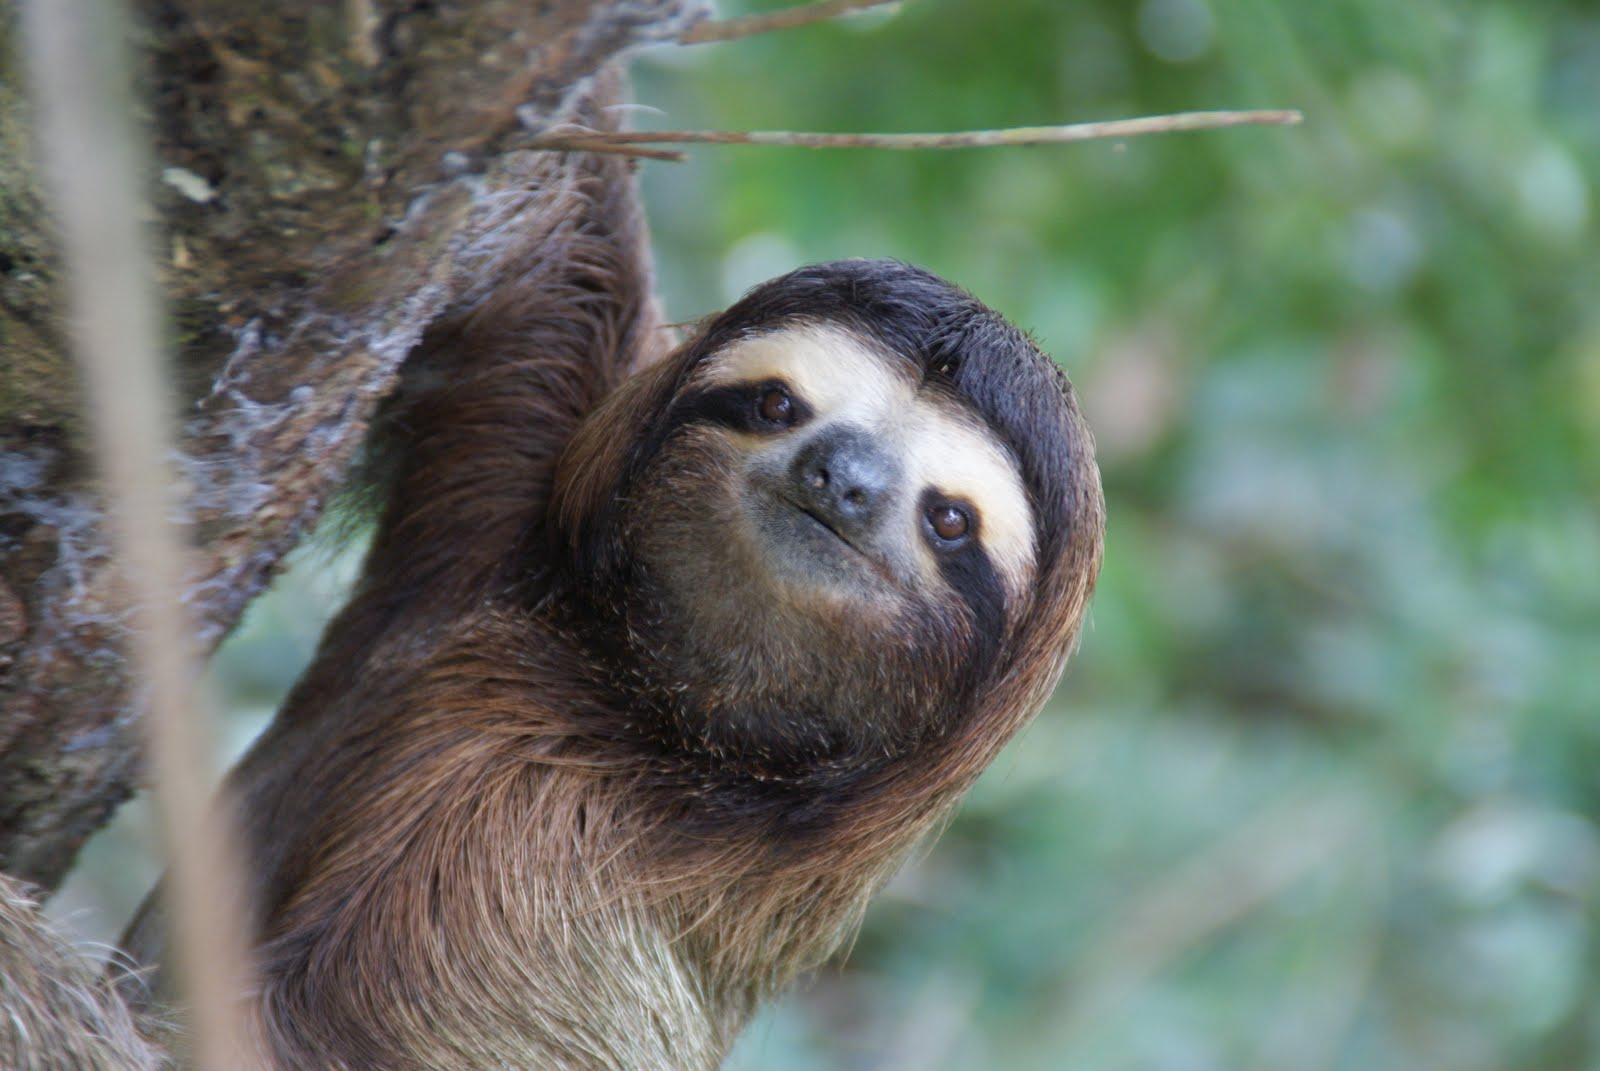 Best 30+ Sloth Wallpapers on HipWallpapers